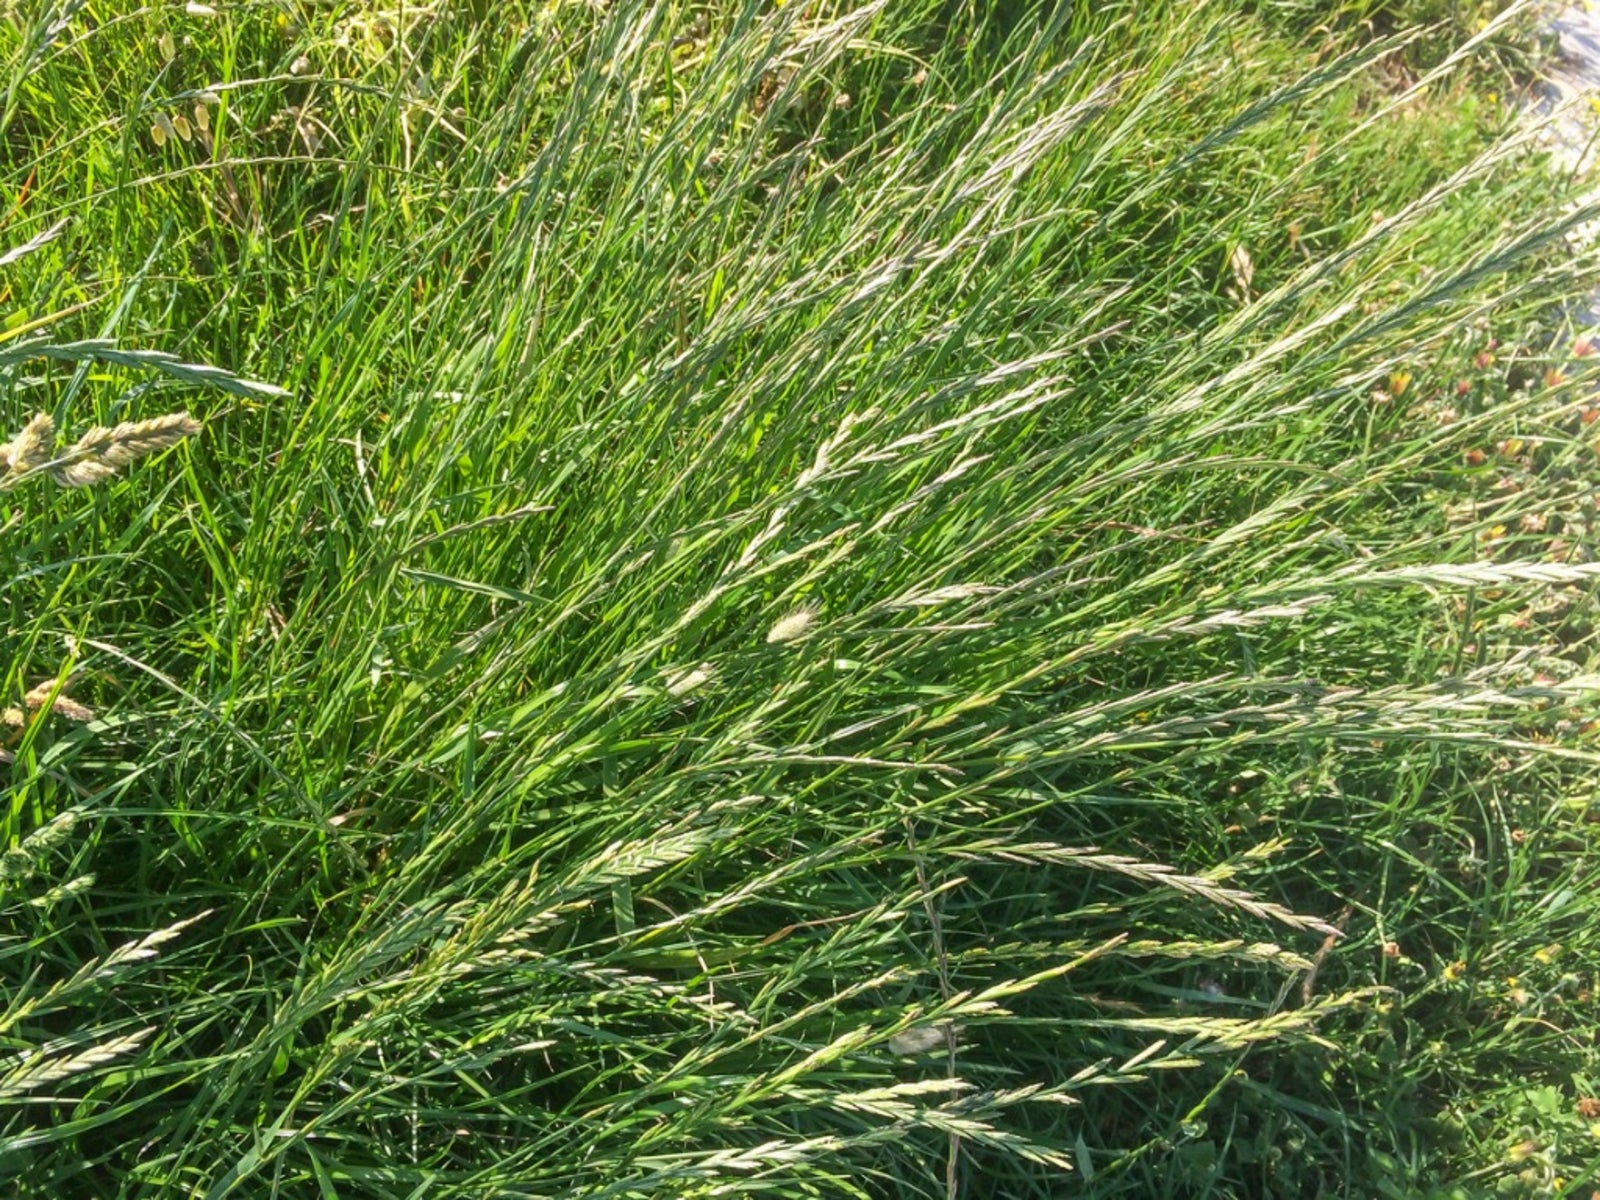 planting perennial ryegrass - what is perennial ryegrass used for